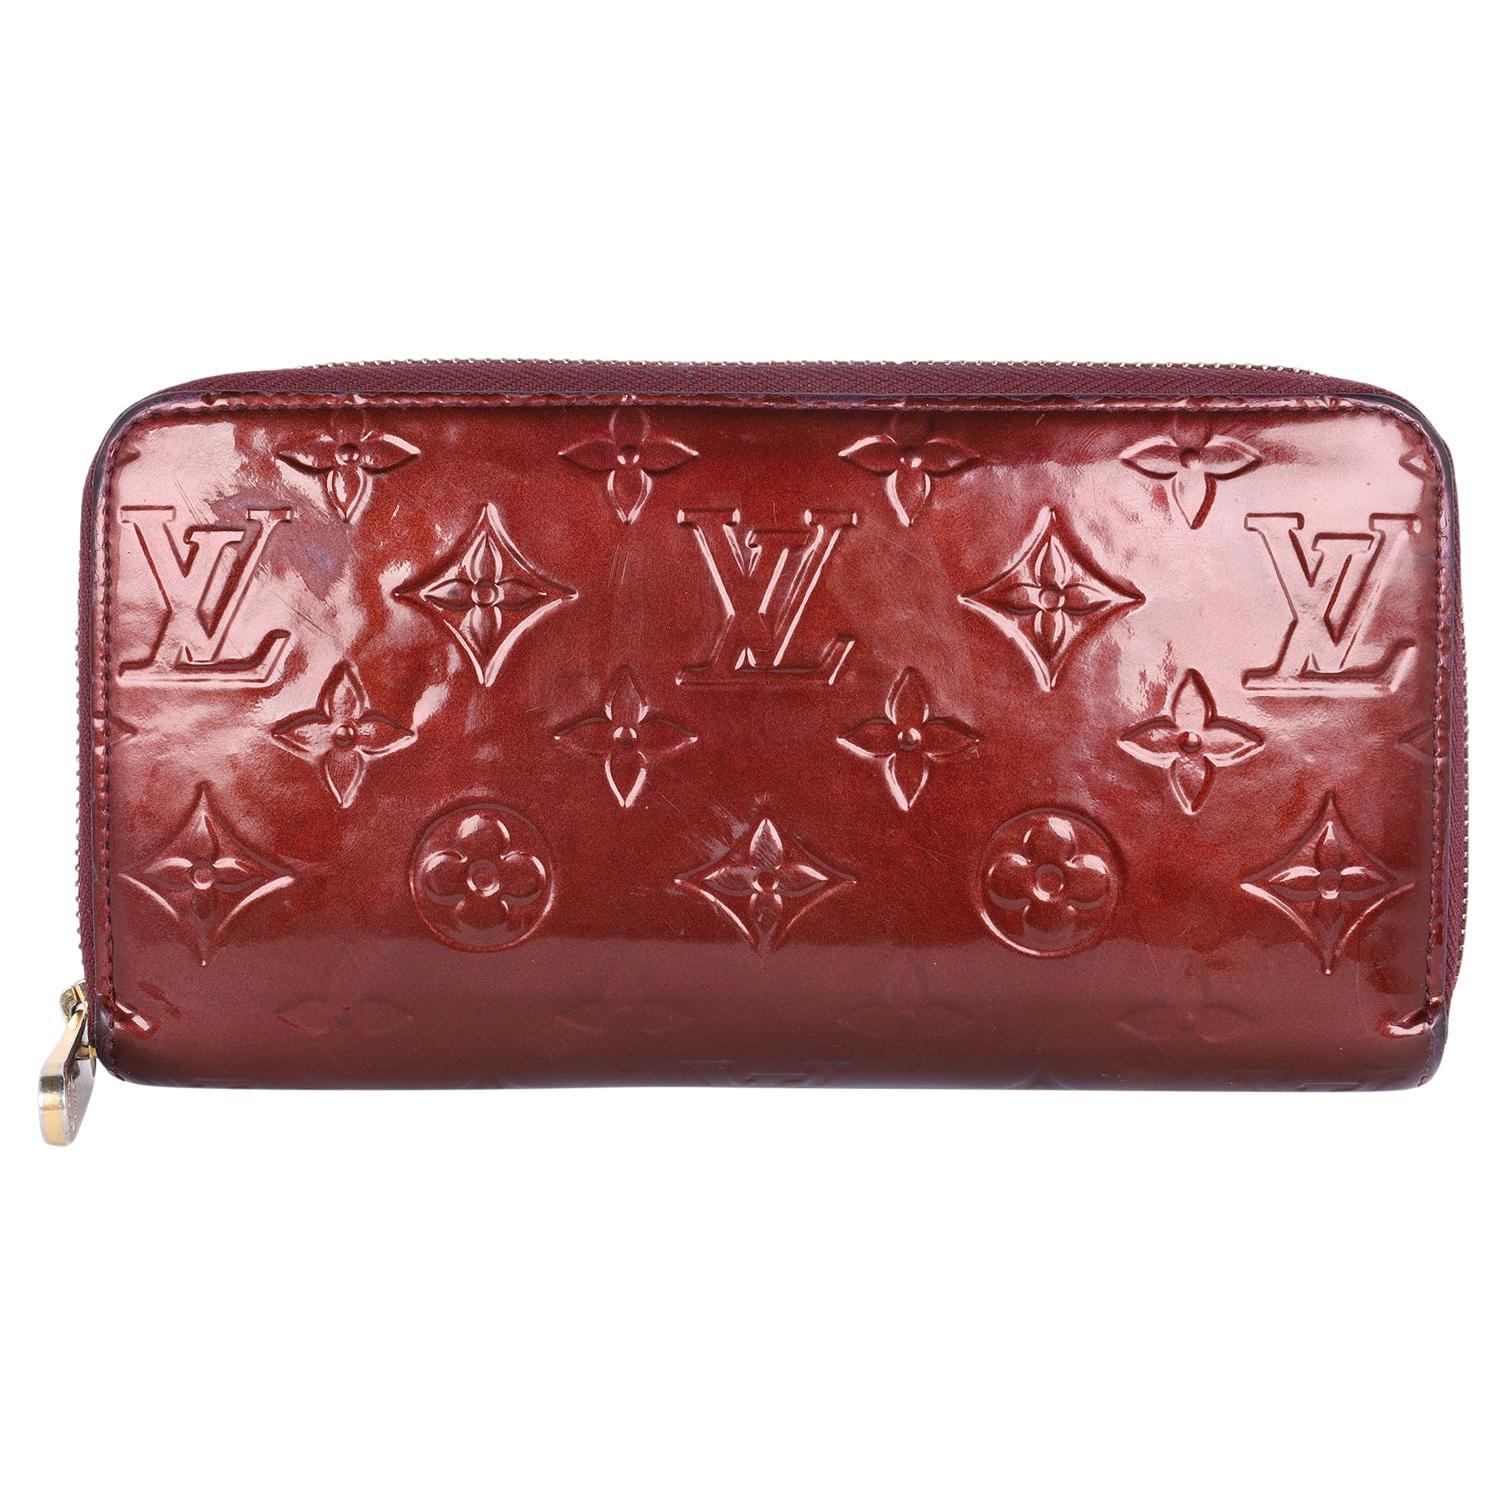 Authentic, pre-loved Louis Vuitton Zippy Monogram Vernis wallet in Rouge fauviste.

Features Vernis monogram with zip around zipper, gold tone hardware, the interior has 8 cc slots, middle zipper pocket for coins, billfold and two large